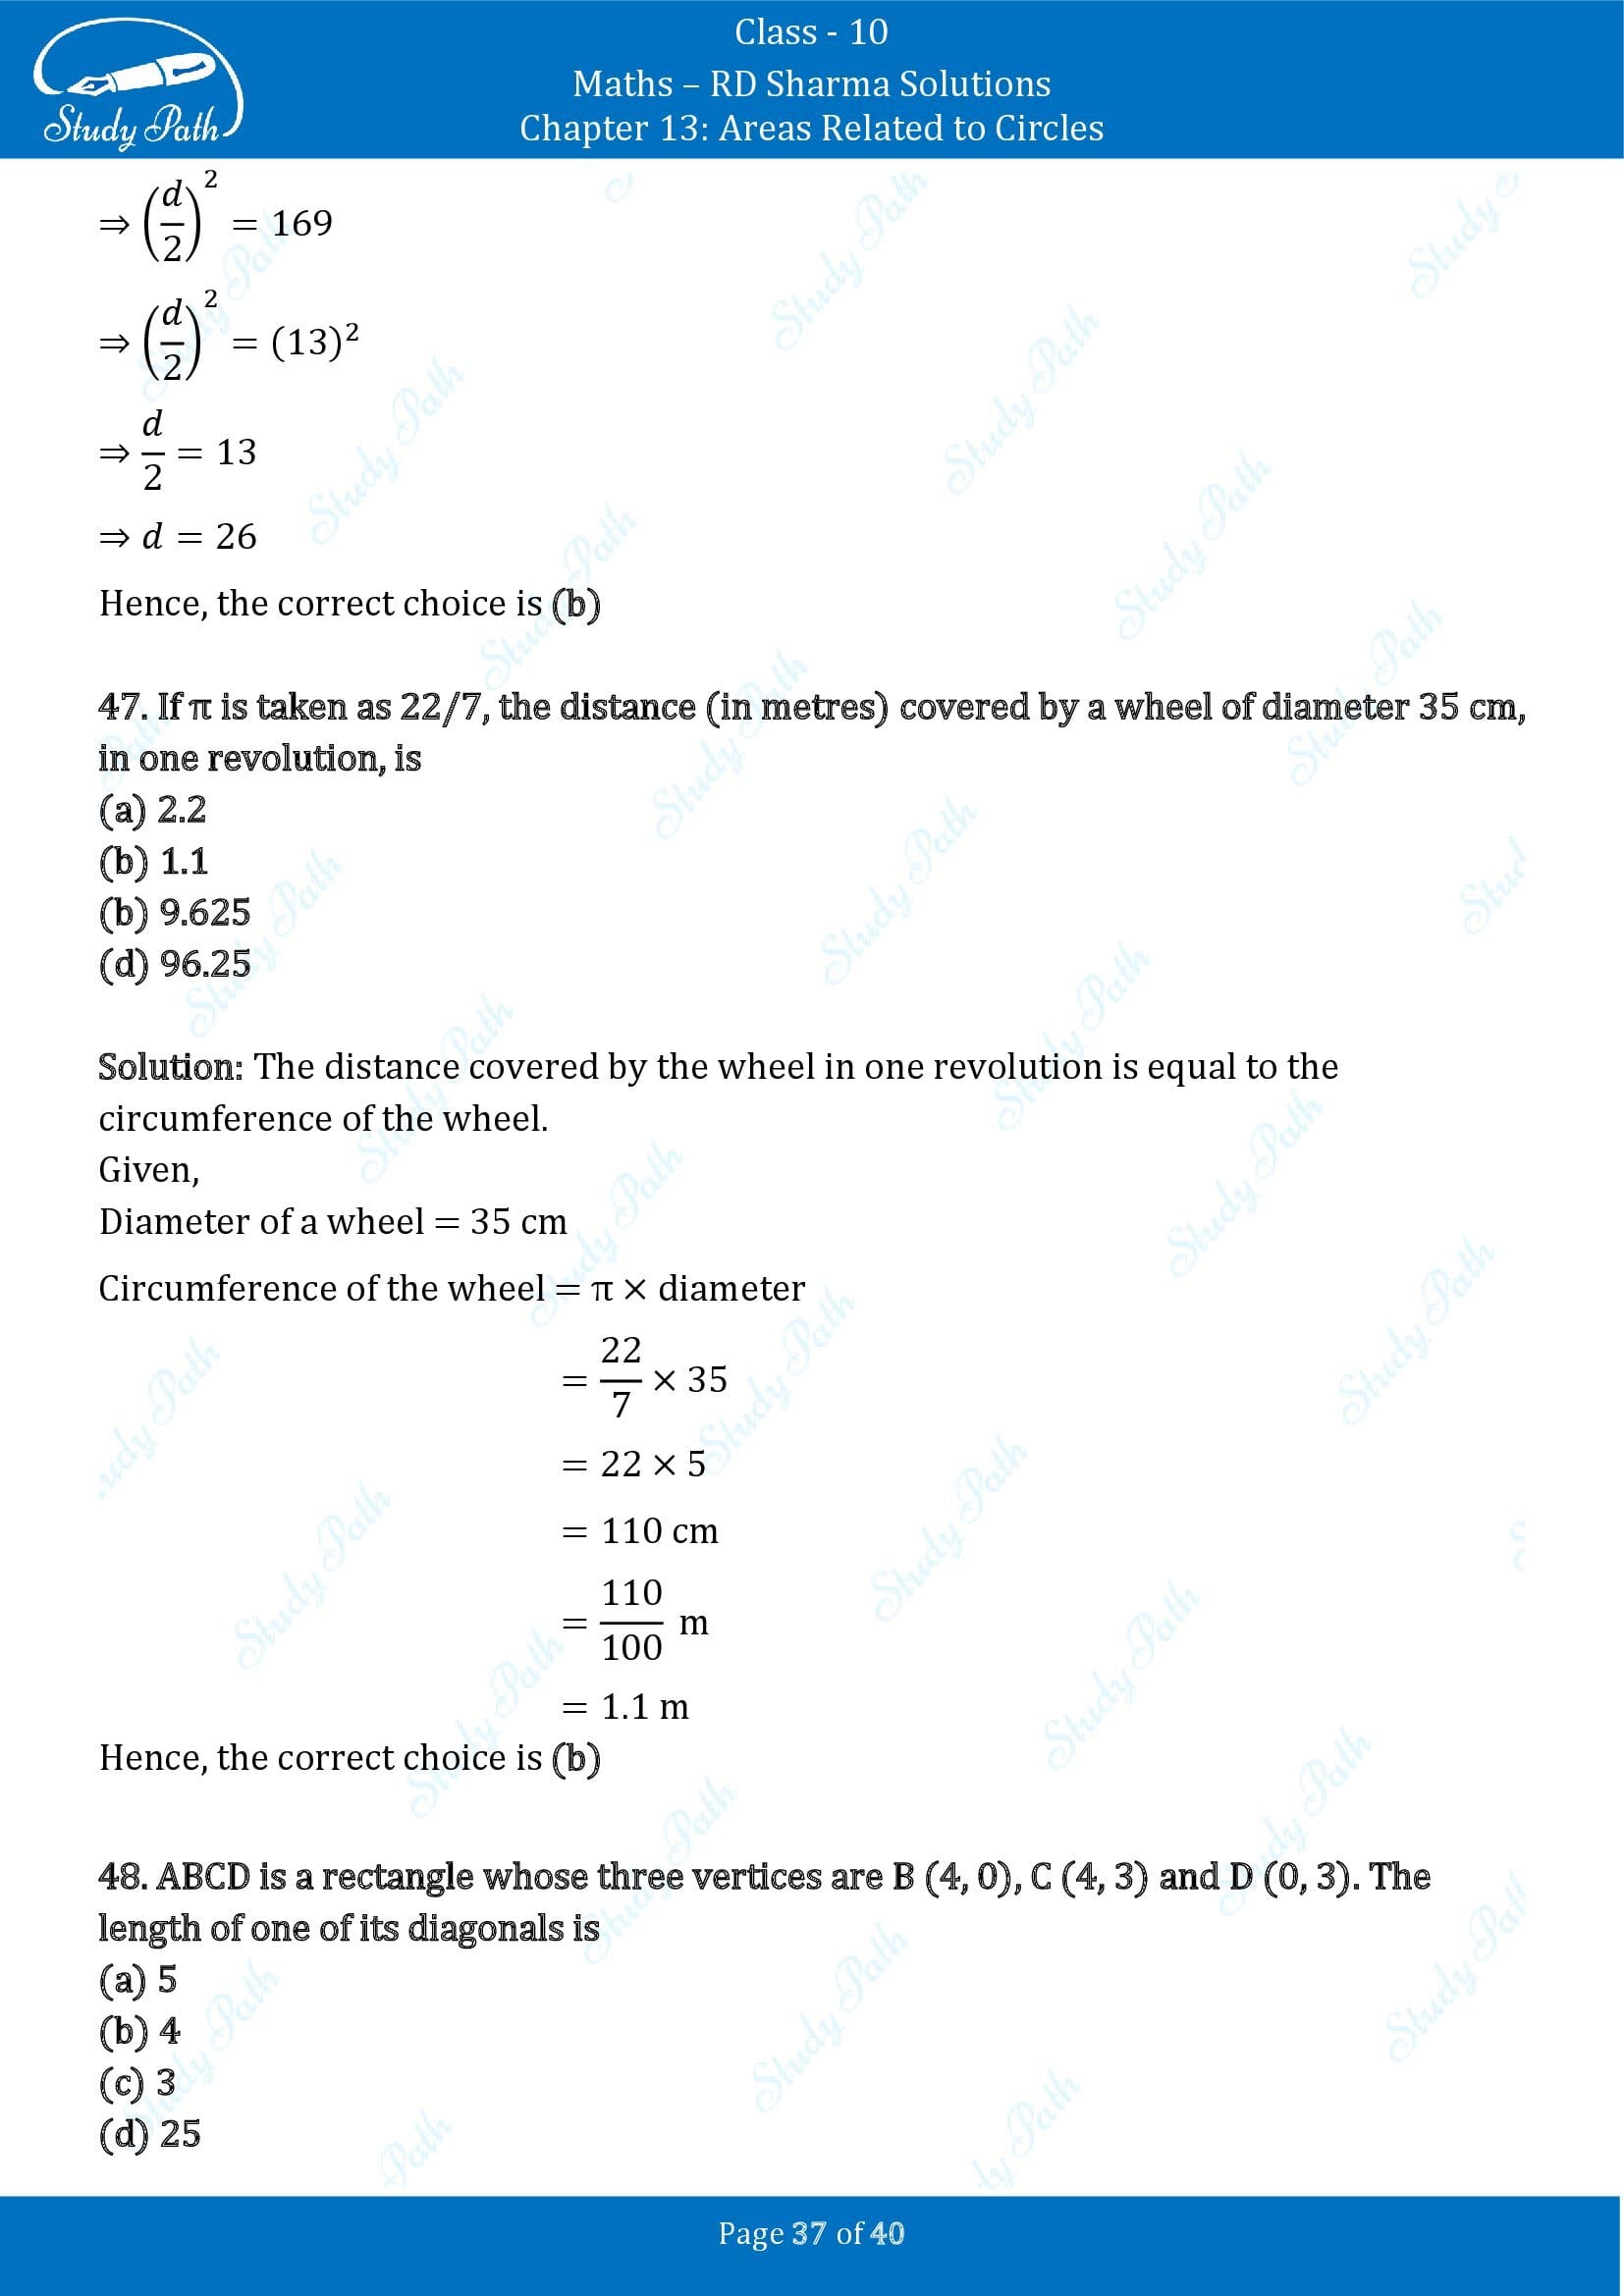 RD Sharma Solutions Class 10 Chapter 13 Areas Related to Circles Multiple Choice Question MCQs 00037